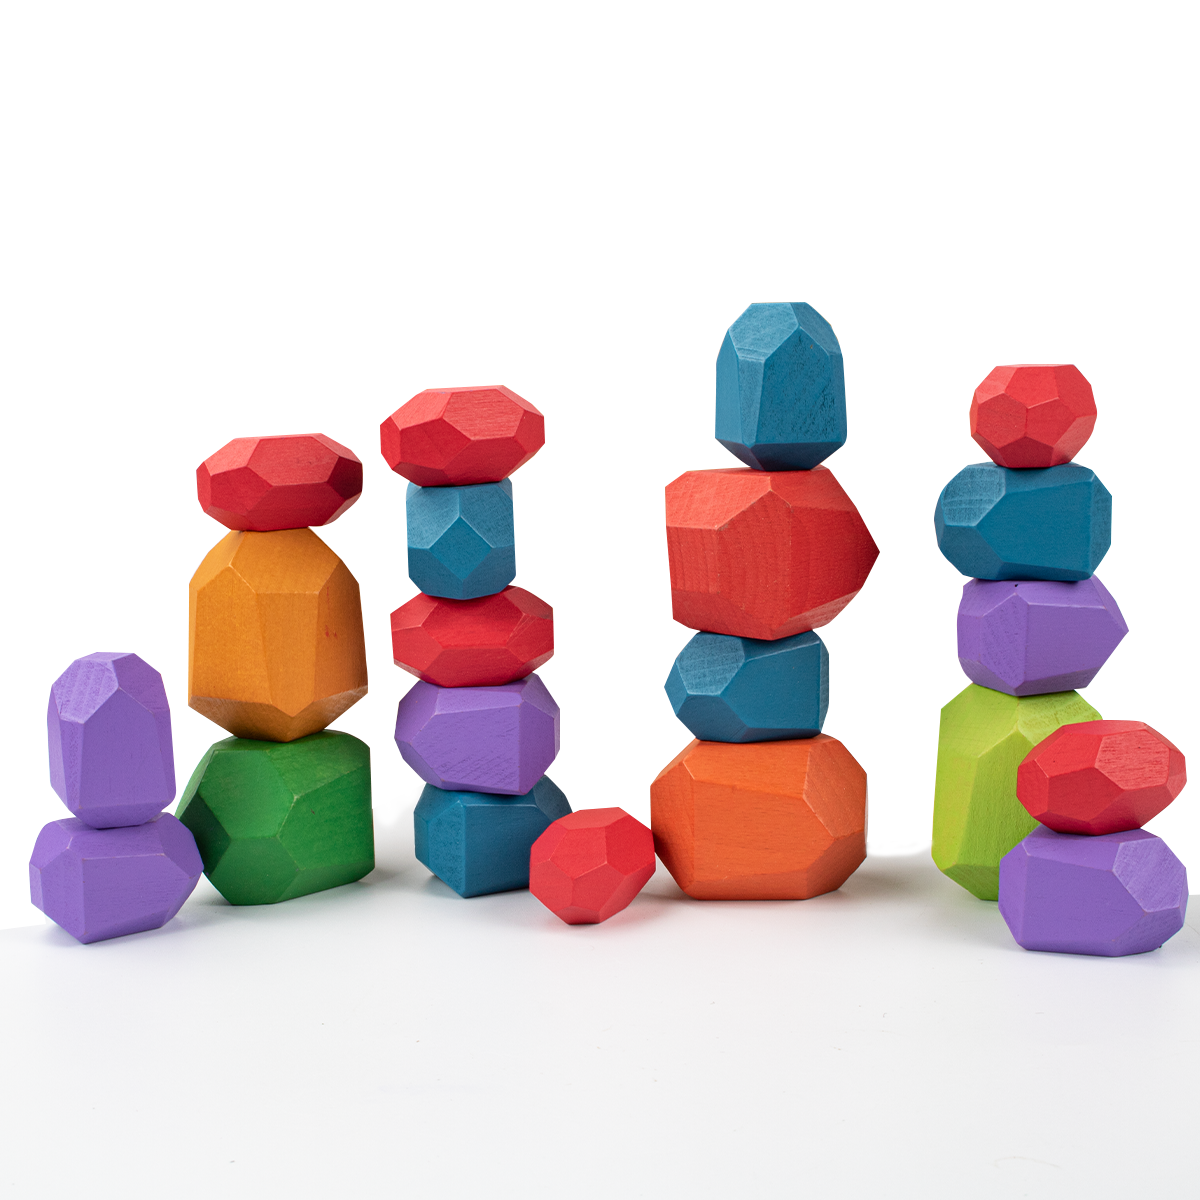 Wooden Colored Stone Stacking Toys For Toddlers